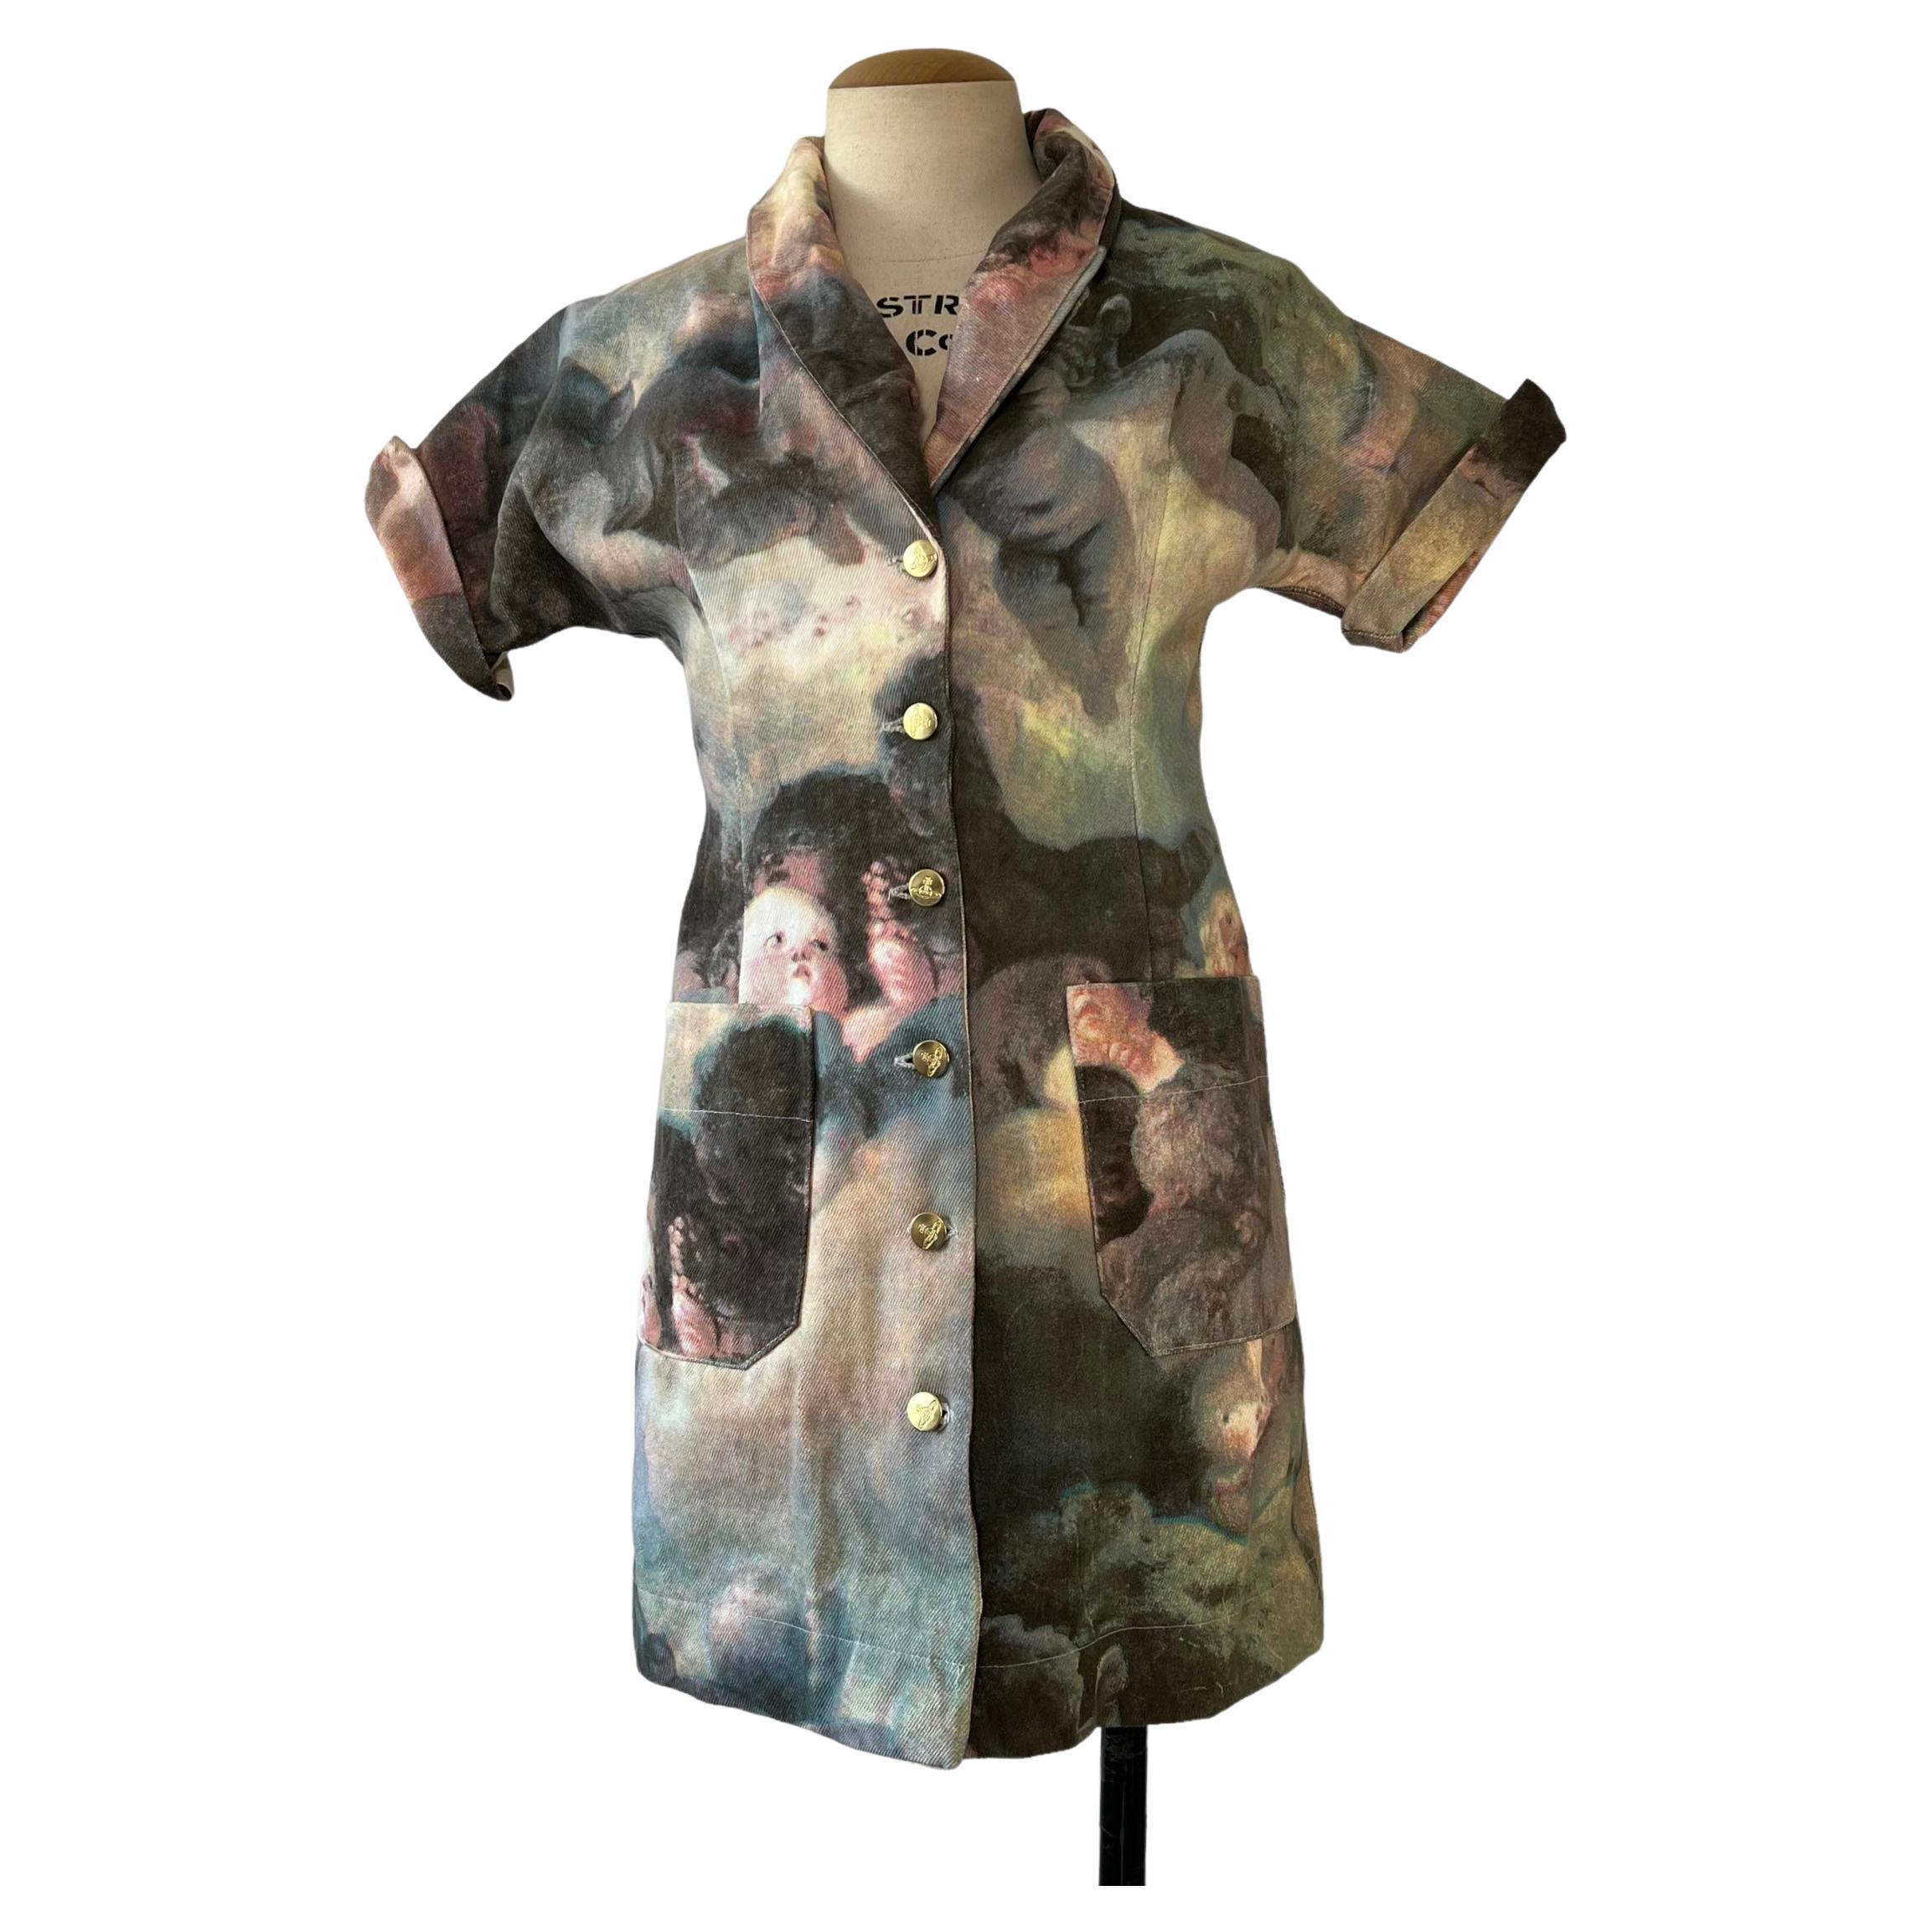 The Vivienne Westwood 1992 Putti Print Dress is a true gem from the iconic fashion designer's remarkable collection. The print was frist released as part of the 1991 Vivienne Westwood collection. But was re-used in the following season. This dress